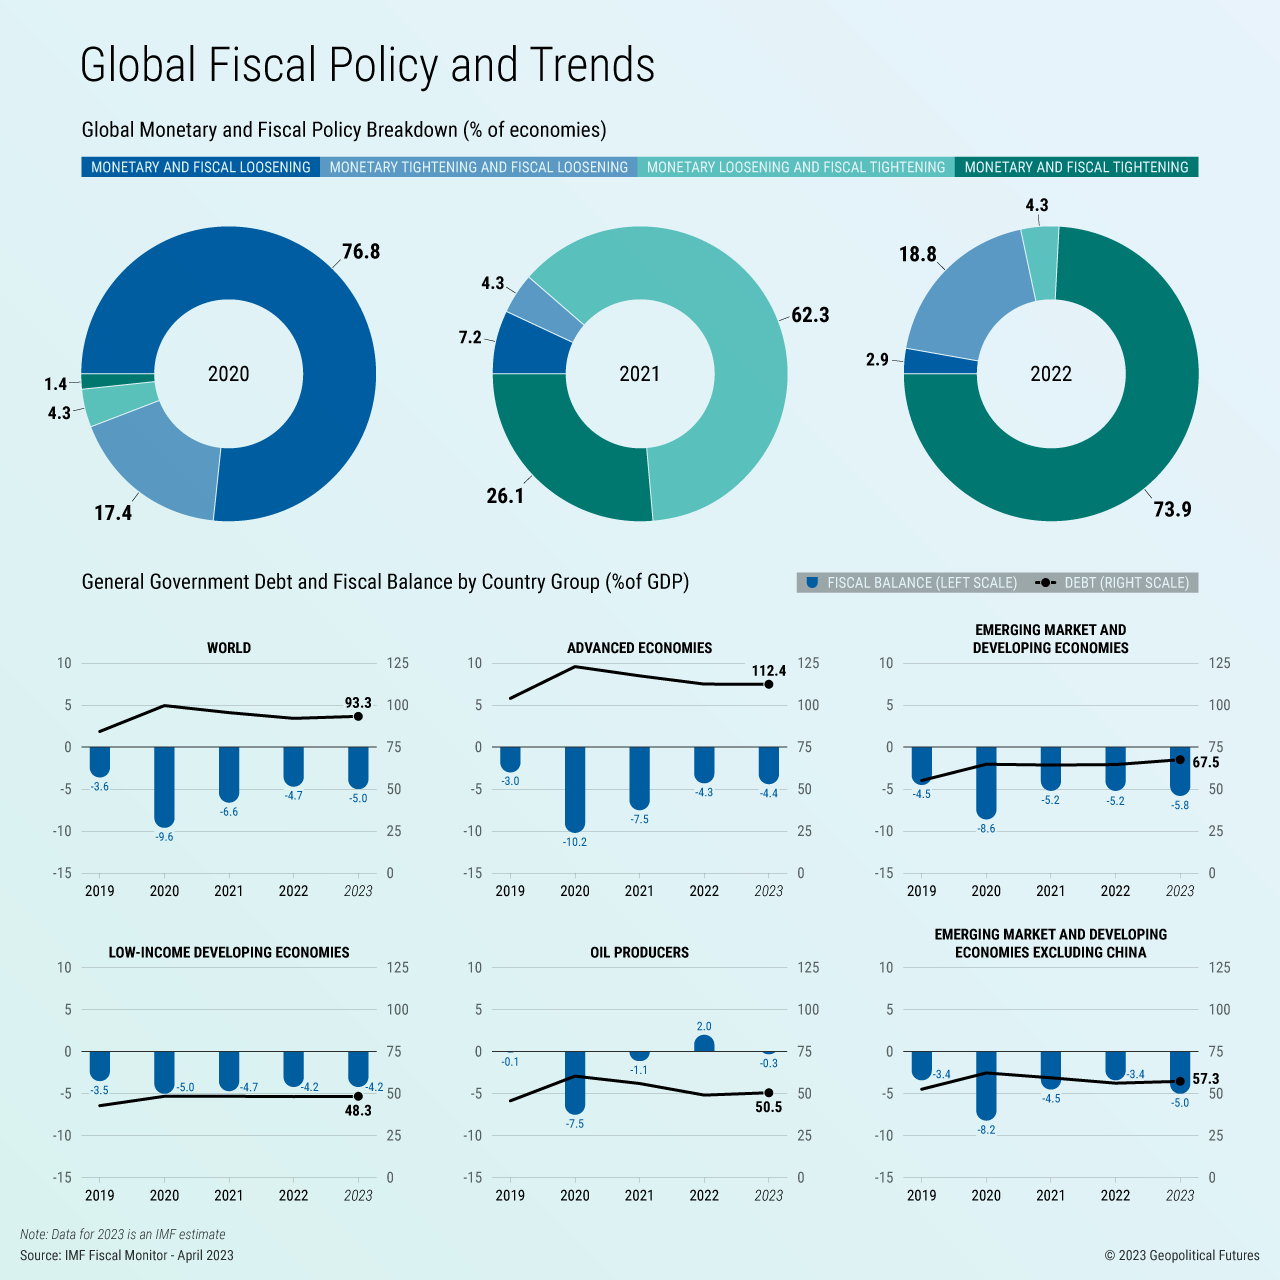 Global Fiscal Policy and Trends